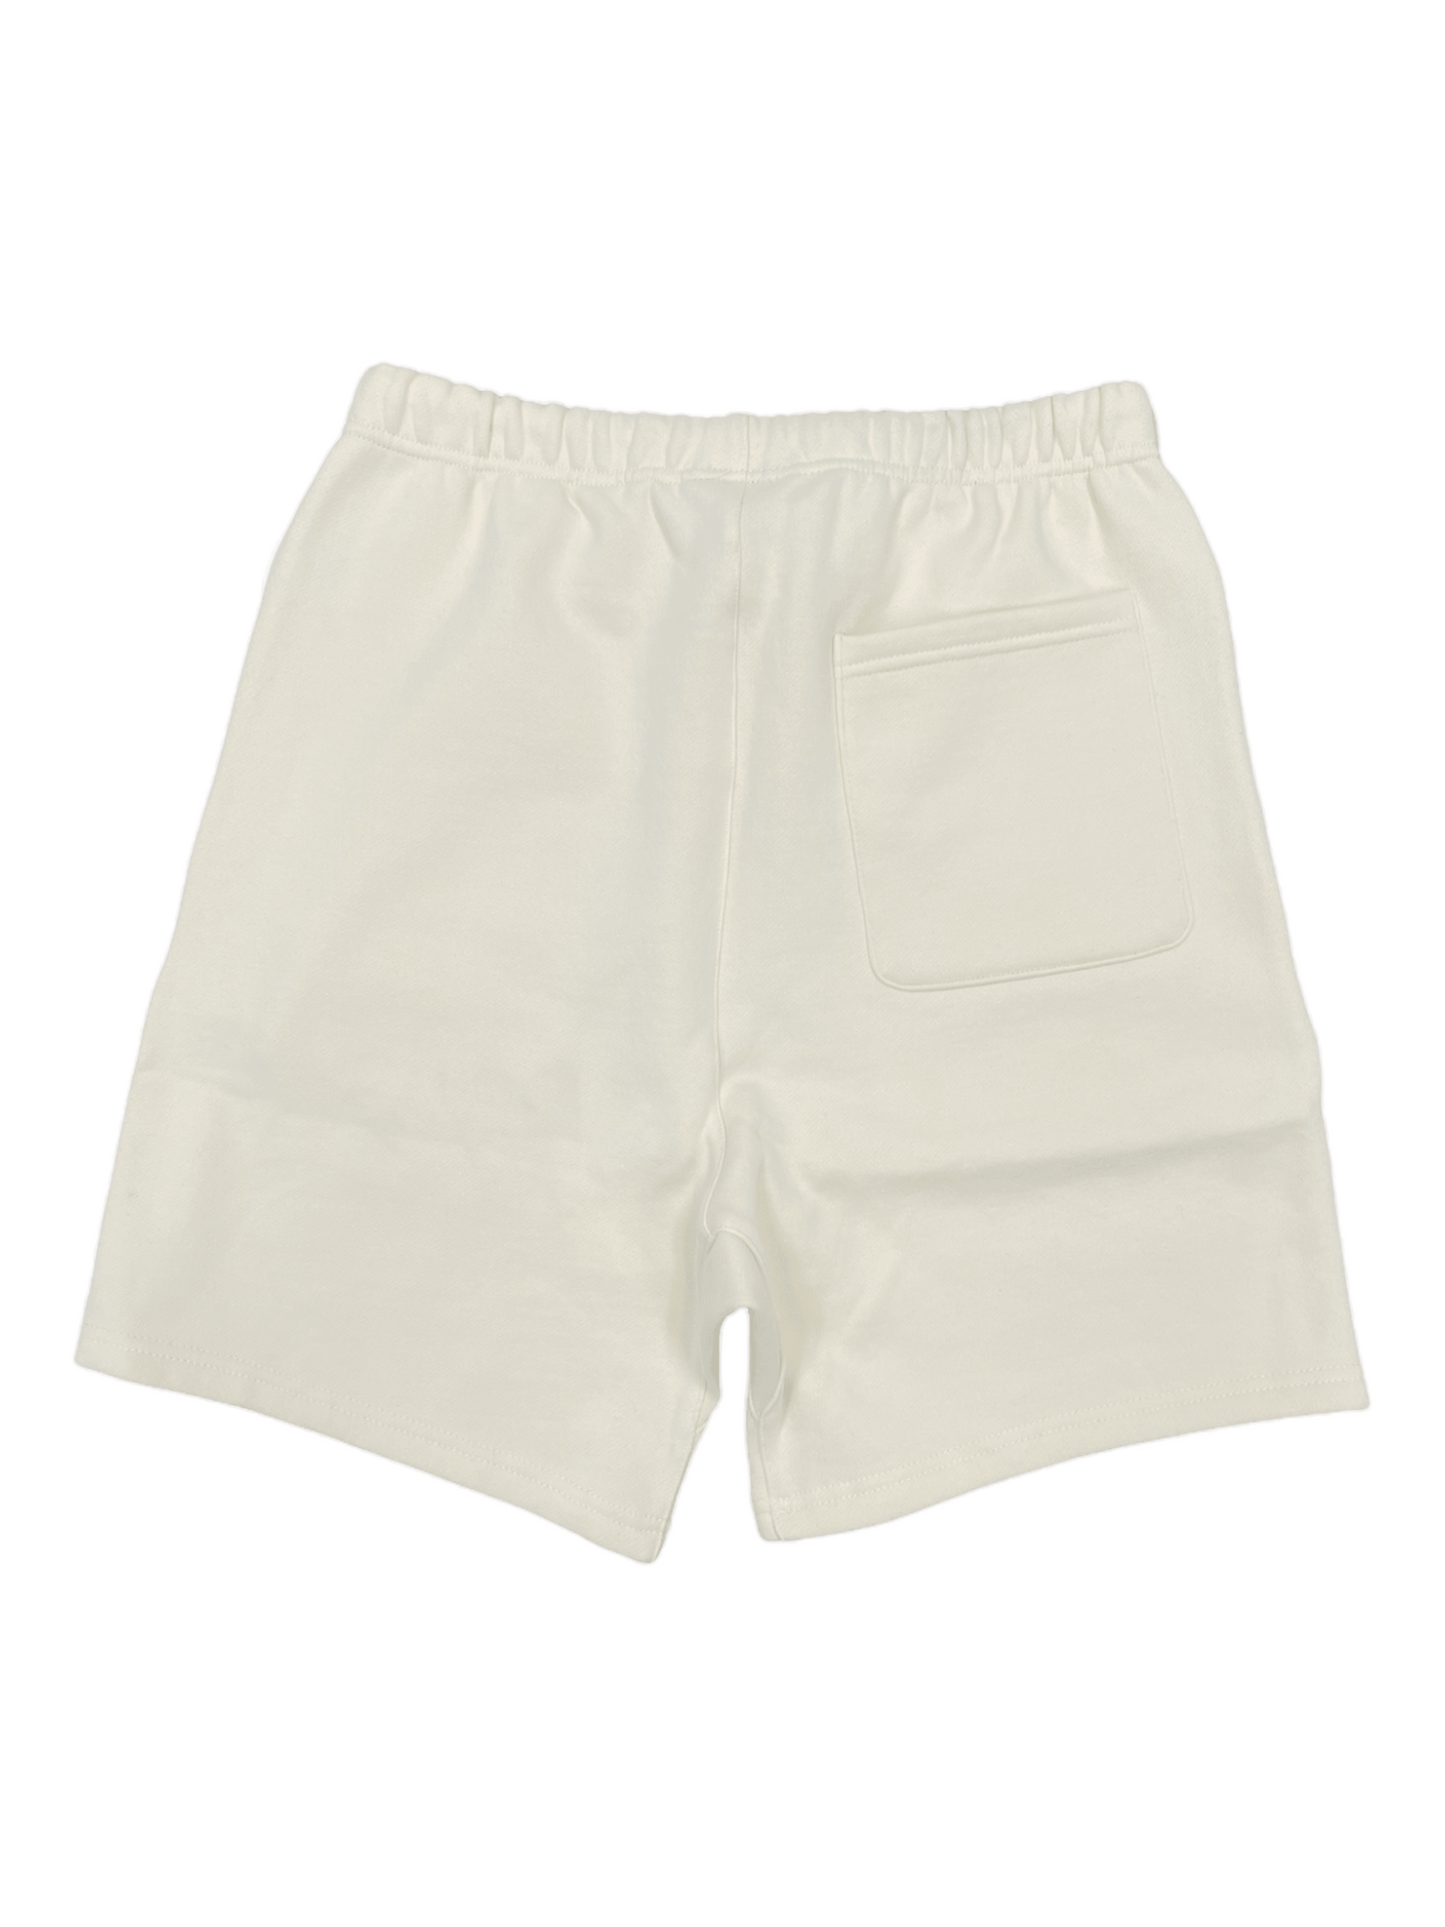 Essentials Fear of God Buttercream Shorts SS20 — Genuine Design Luxury Consignment Calgary, Alberta, Canada New & Pre-Owned Clothing, Shoes, Accessories.